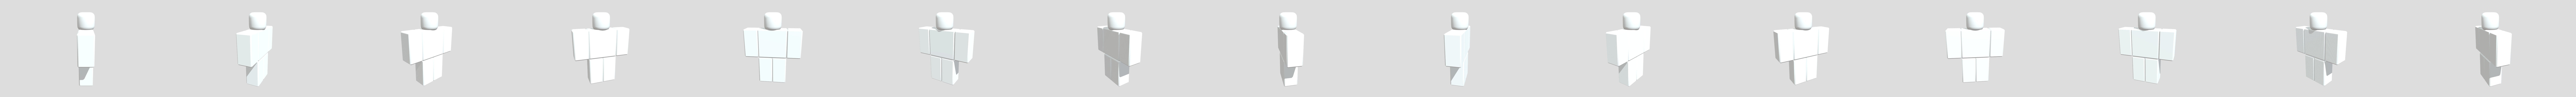 ROBLOX CHARACTER - Download Free 3D model by DrKianrors